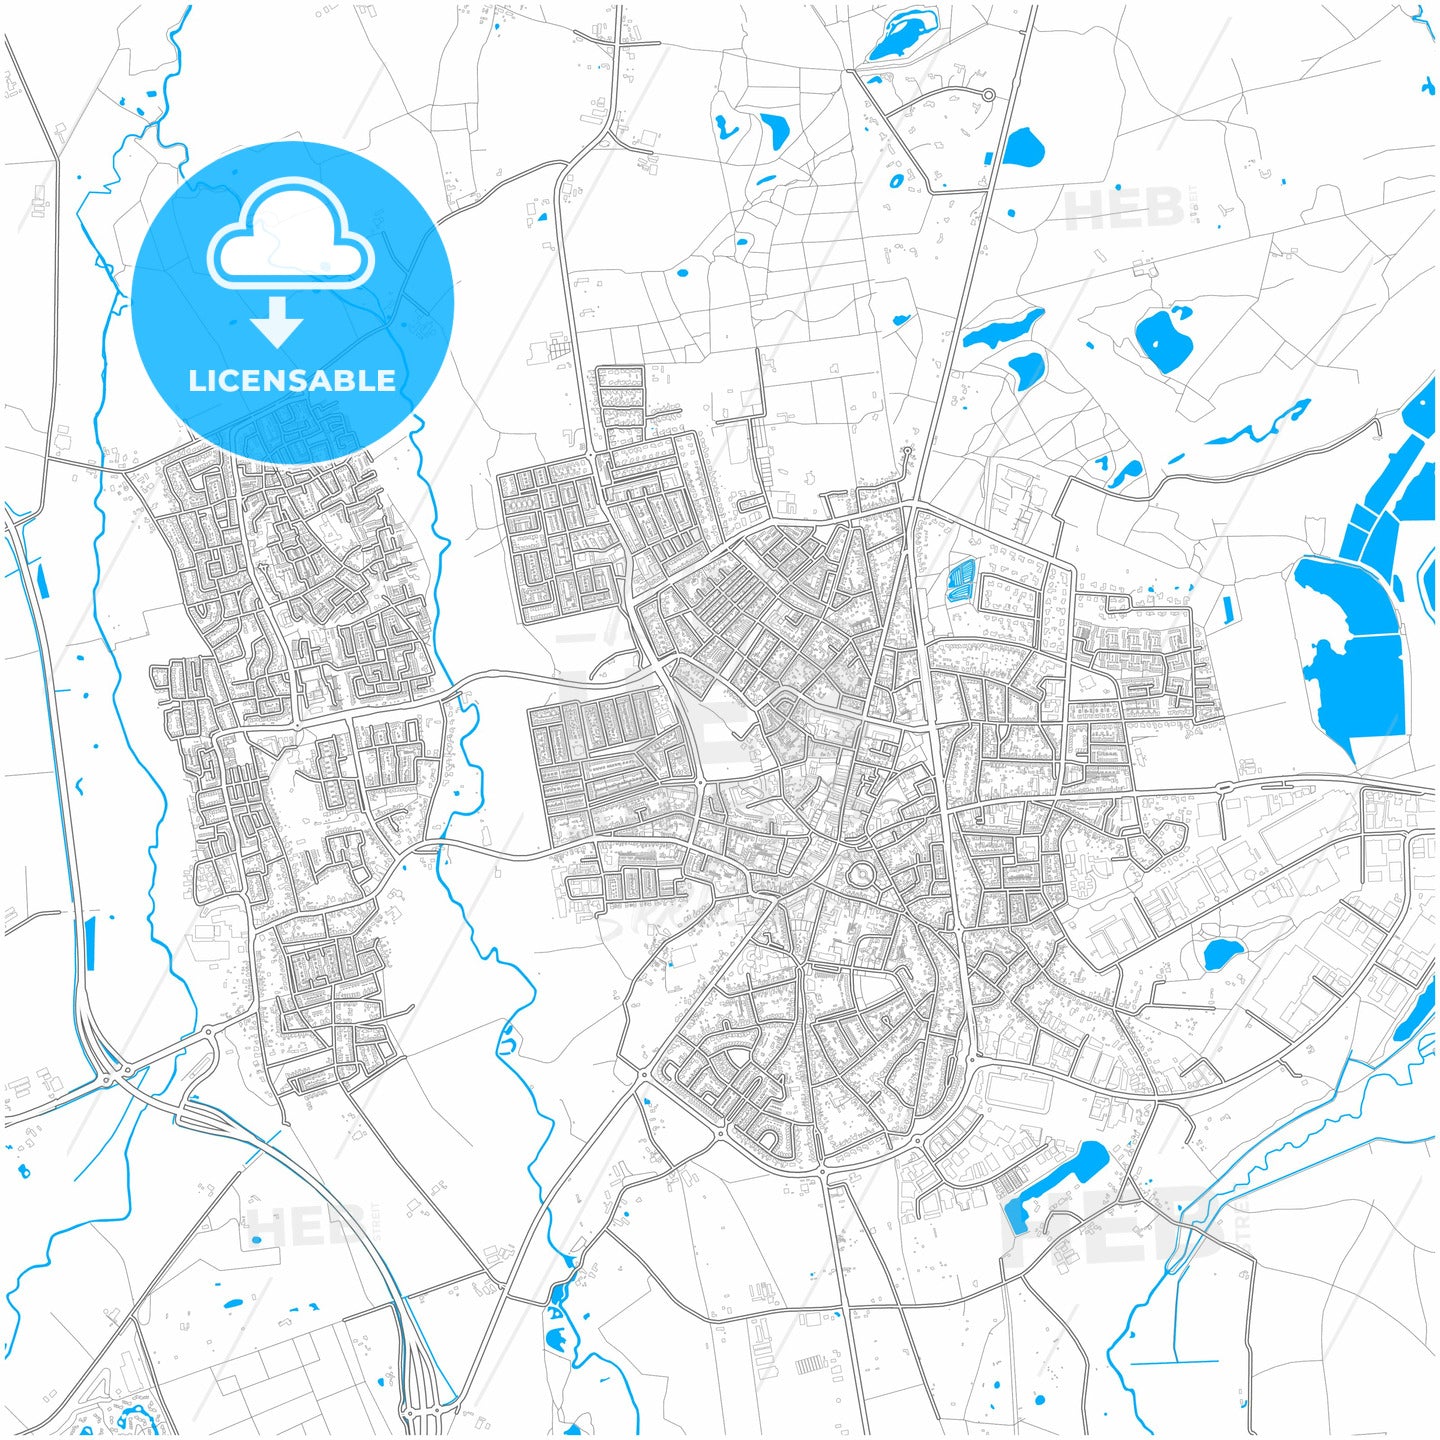 Valkenswaard, North Brabant, Netherlands, city map with high quality roads.